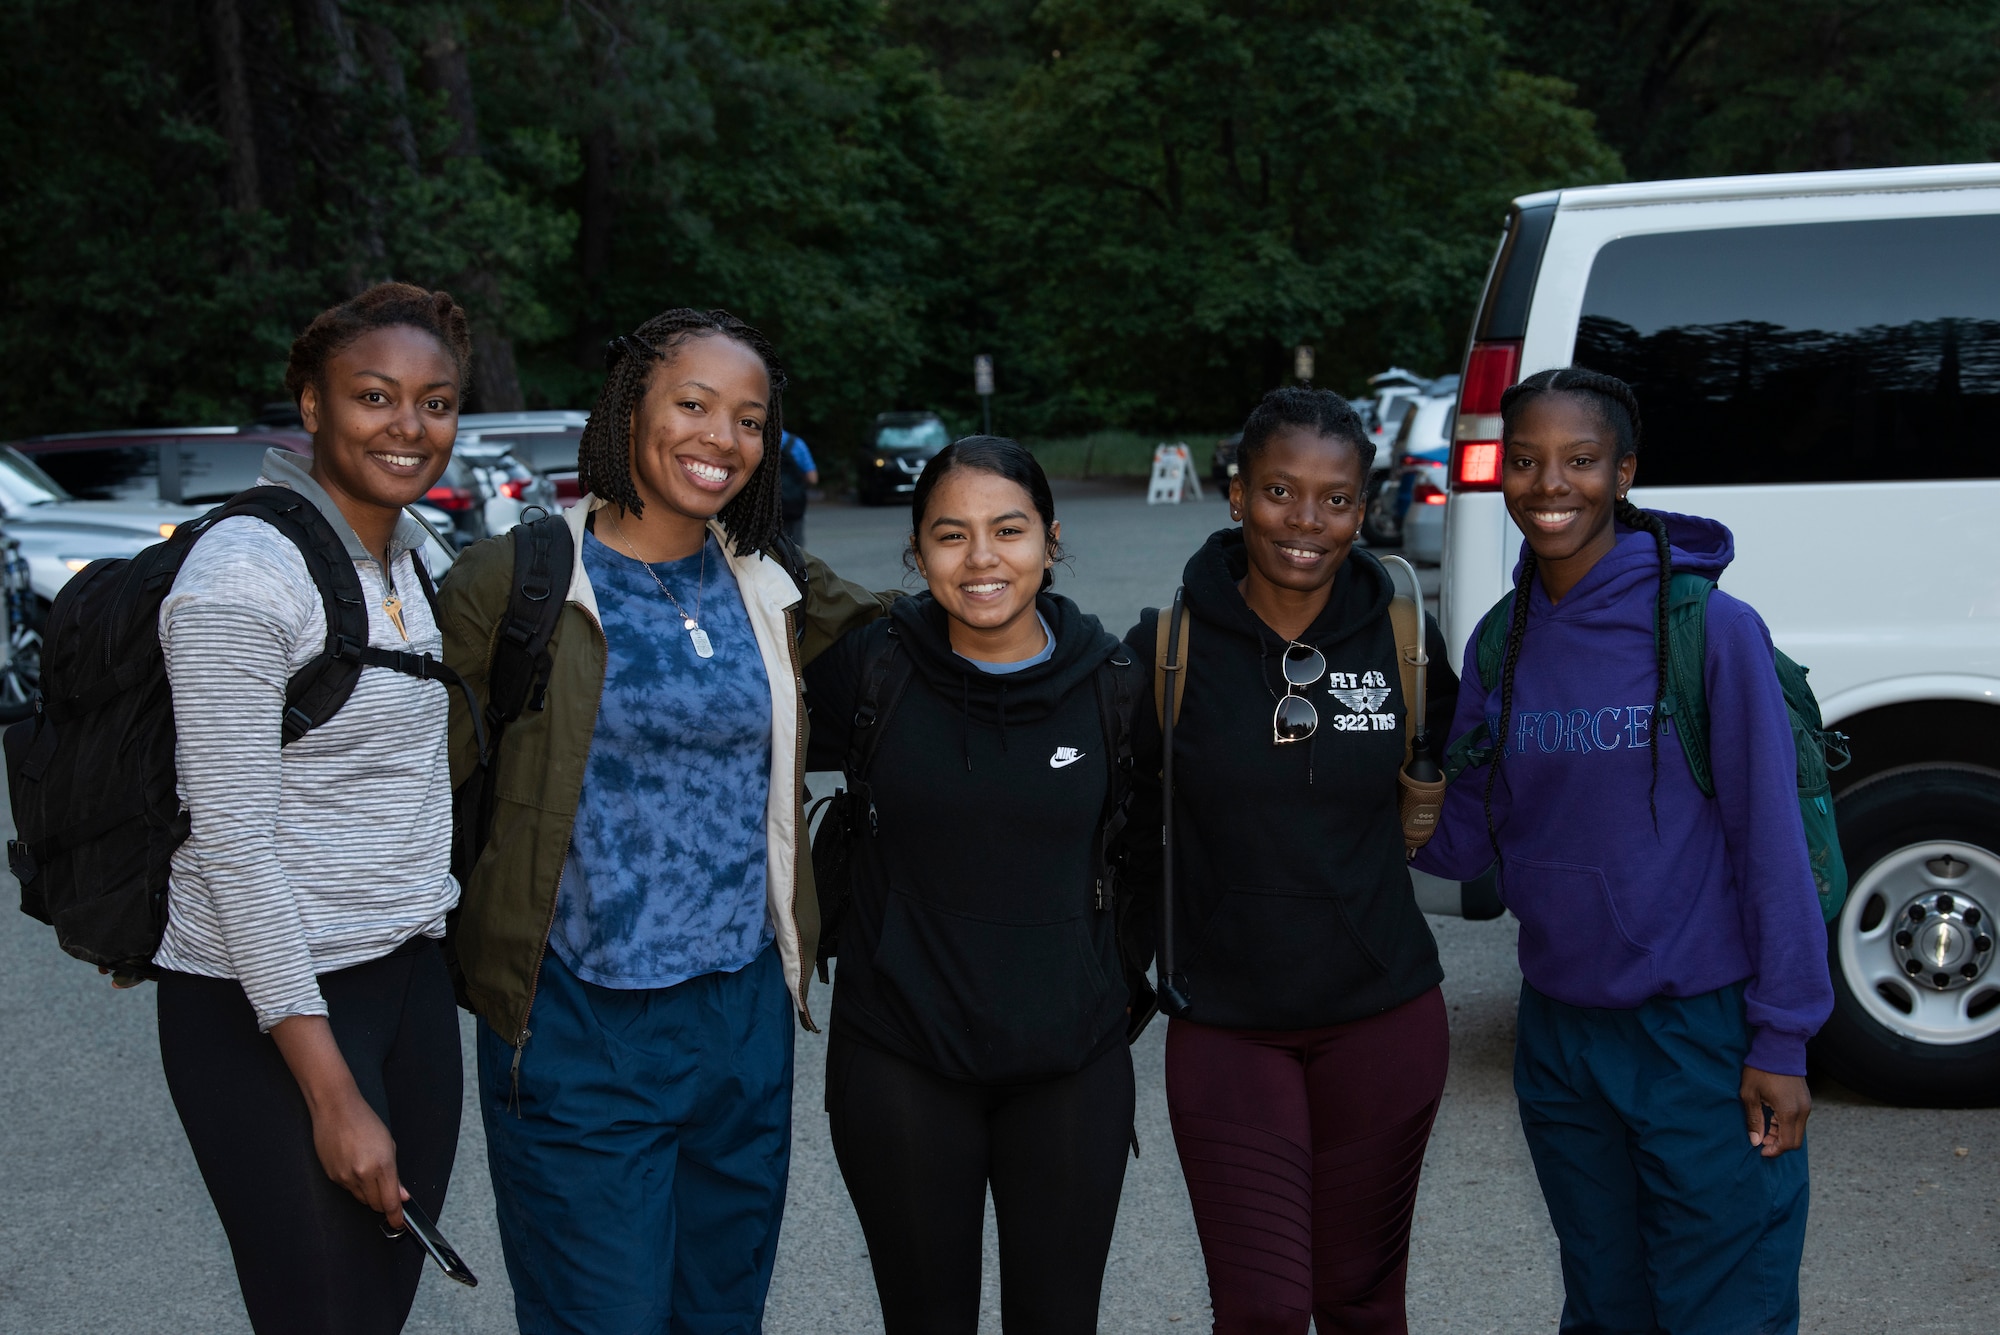 U.S. Air Force Airmen from Travis Air Force Base, California, July 13, 2019, at Yosemite National Park, California, prior to hiking to Cloud’s Rest. Airmen from 21 organizations participated in a 14.57-mile hike to Cloud’s Rest, 9,926 feet above sea level. The hike was organized to enhance the Airmen’s physical, mental and spiritual resiliency. (U.S. Air Fore photo by Tech. Sgt. James Hodgman)